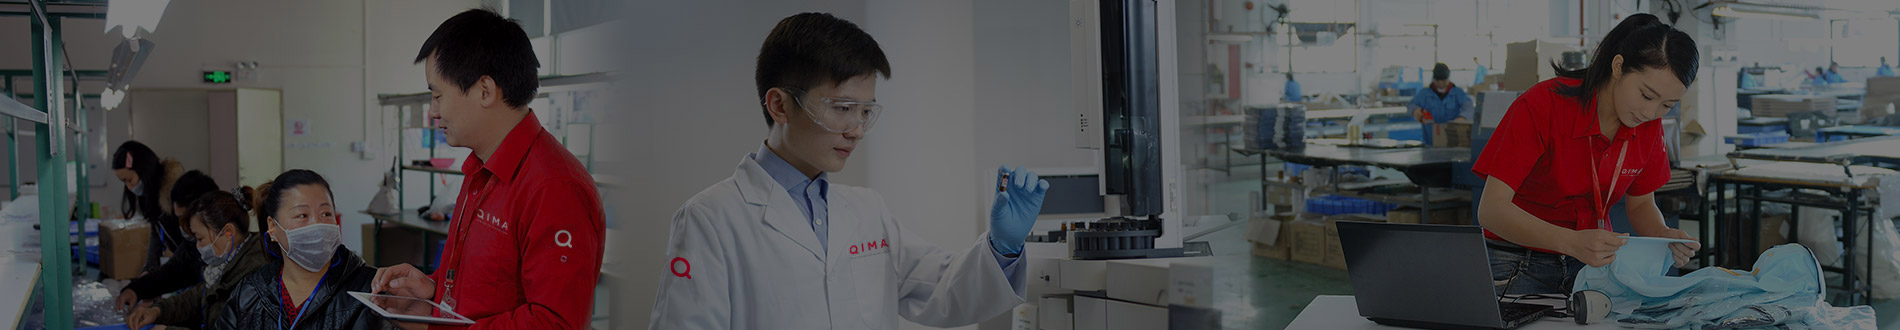 Product Inspection Agency | QIMA